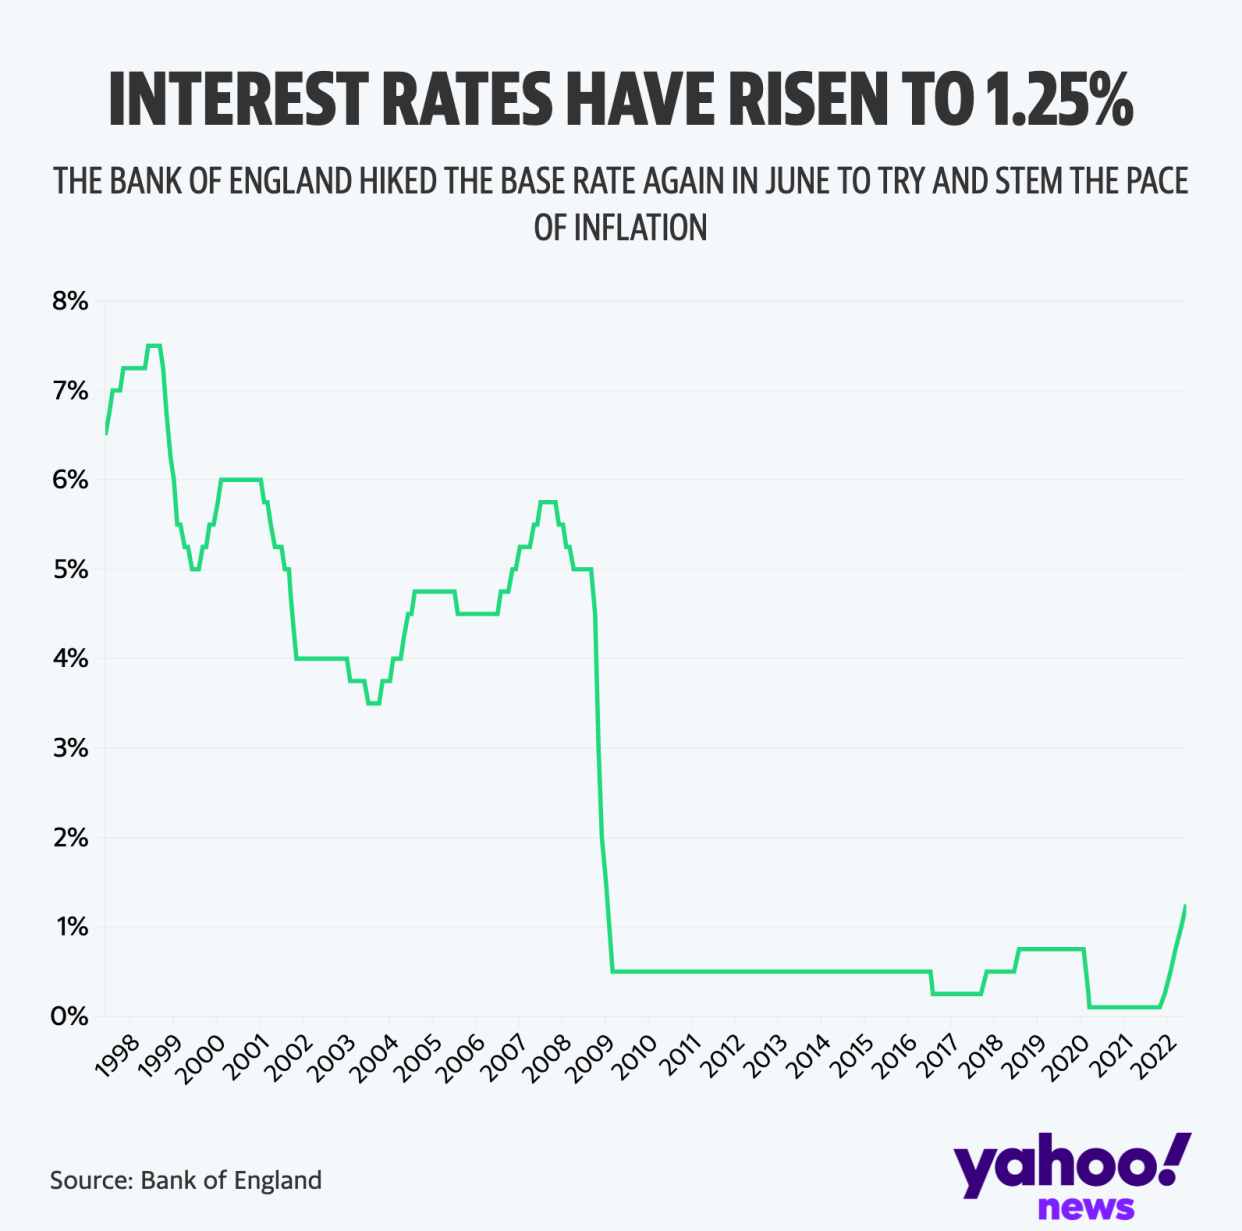 UK interest rates could hit 2 or even higher, warns Bank of England's